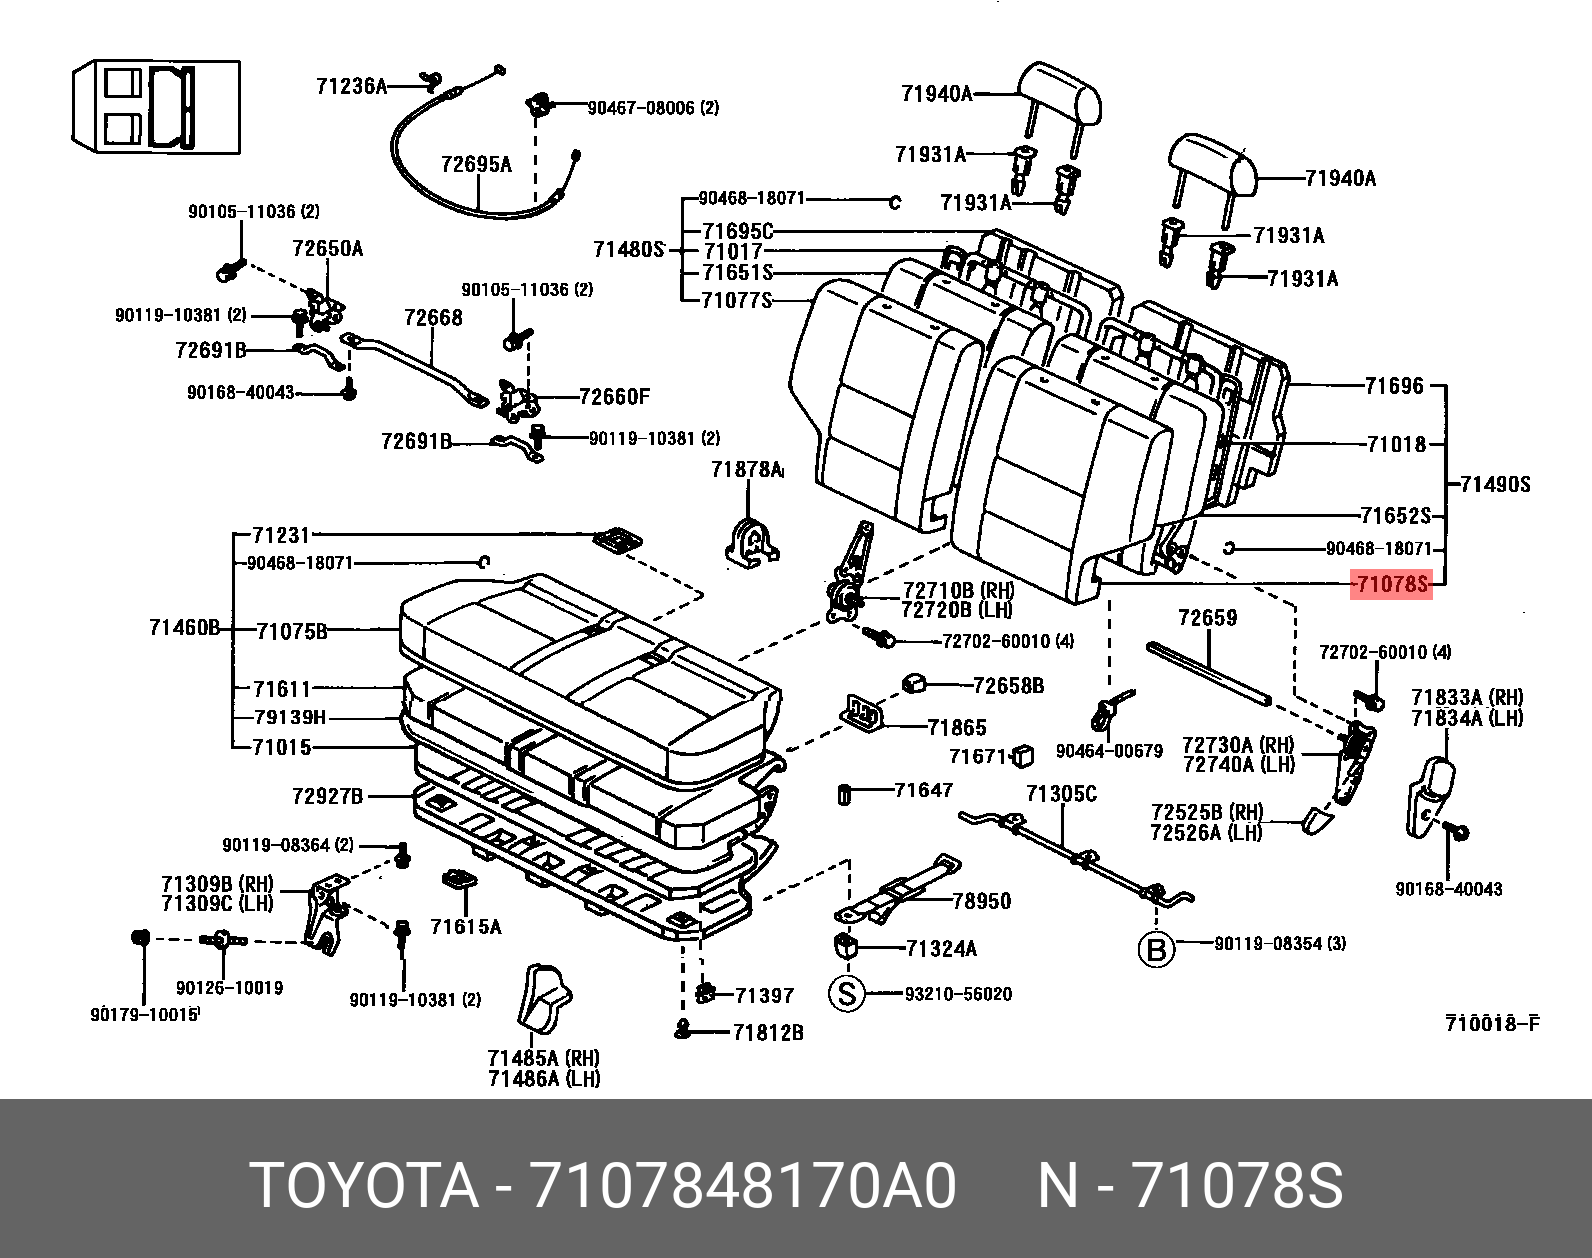 7107848170A0, HARRIER 199712-200302, ACU1#, MCU1#, SXU1#, COVER, REAR SEAT BACK, LH(FOR SEPARATE TYPE)